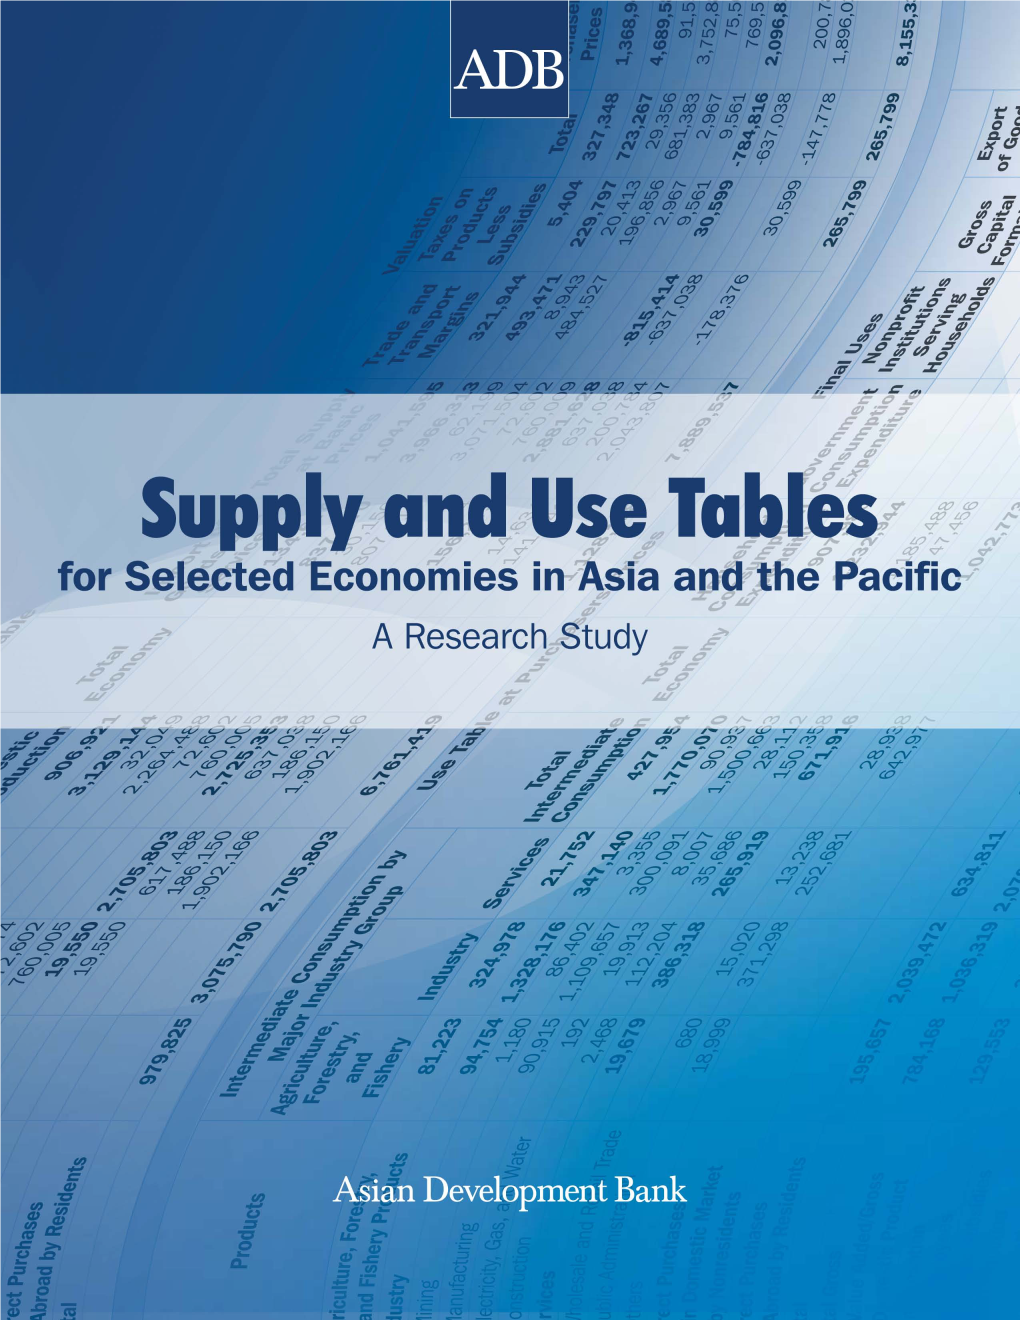 Supply and Use Tables for Selected Economies in Asia and the Pacific